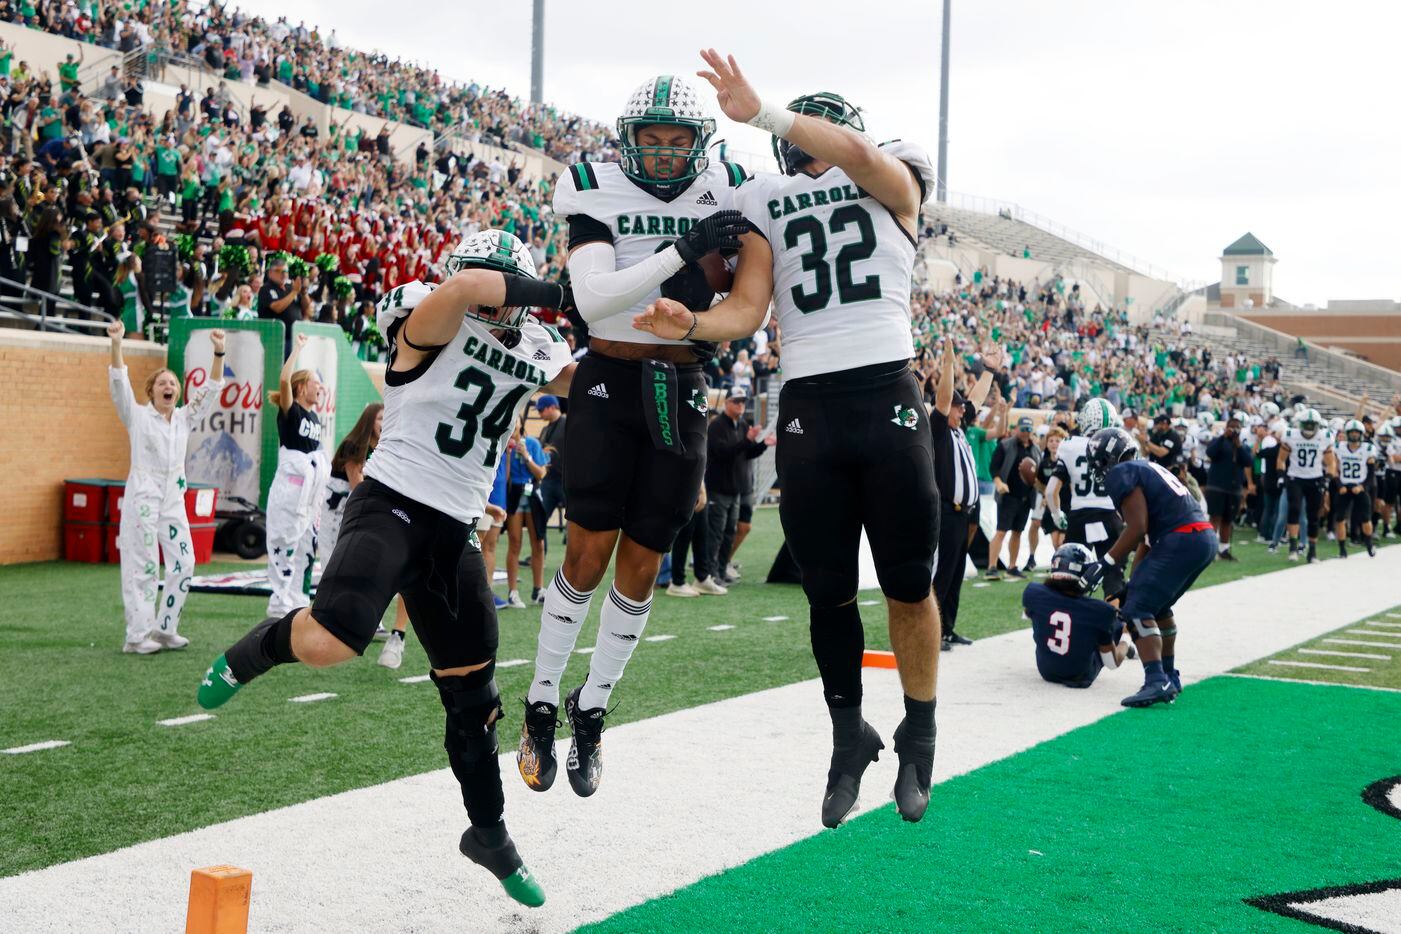 Southlake defendersTravis Keener (34) and Benecio Porras (32) celebrate with Avyonne Jones, center, after he scored a touchdown on an interception, against Allen during the first half of a Class 6A Division I Region I final high school football game in Denton, Texas on Saturday, Dec. 4, 2021. (Michael Ainsworth/Special Contributor)